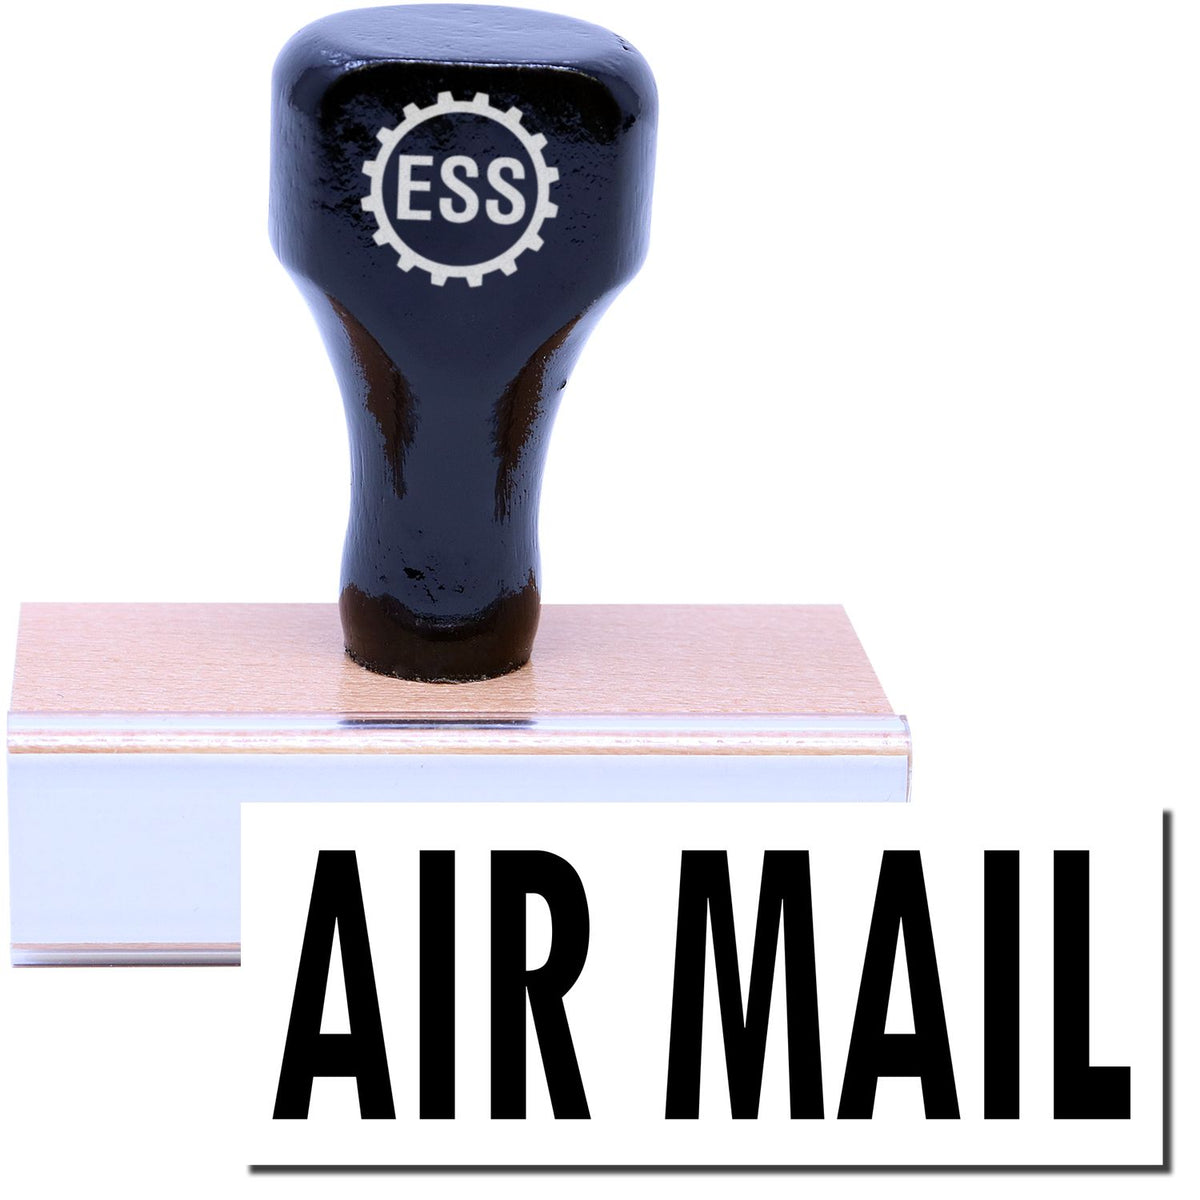 A stock office rubber stamp with a stamped image showing how the text &quot;AIR MAIL&quot; is displayed after stamping.